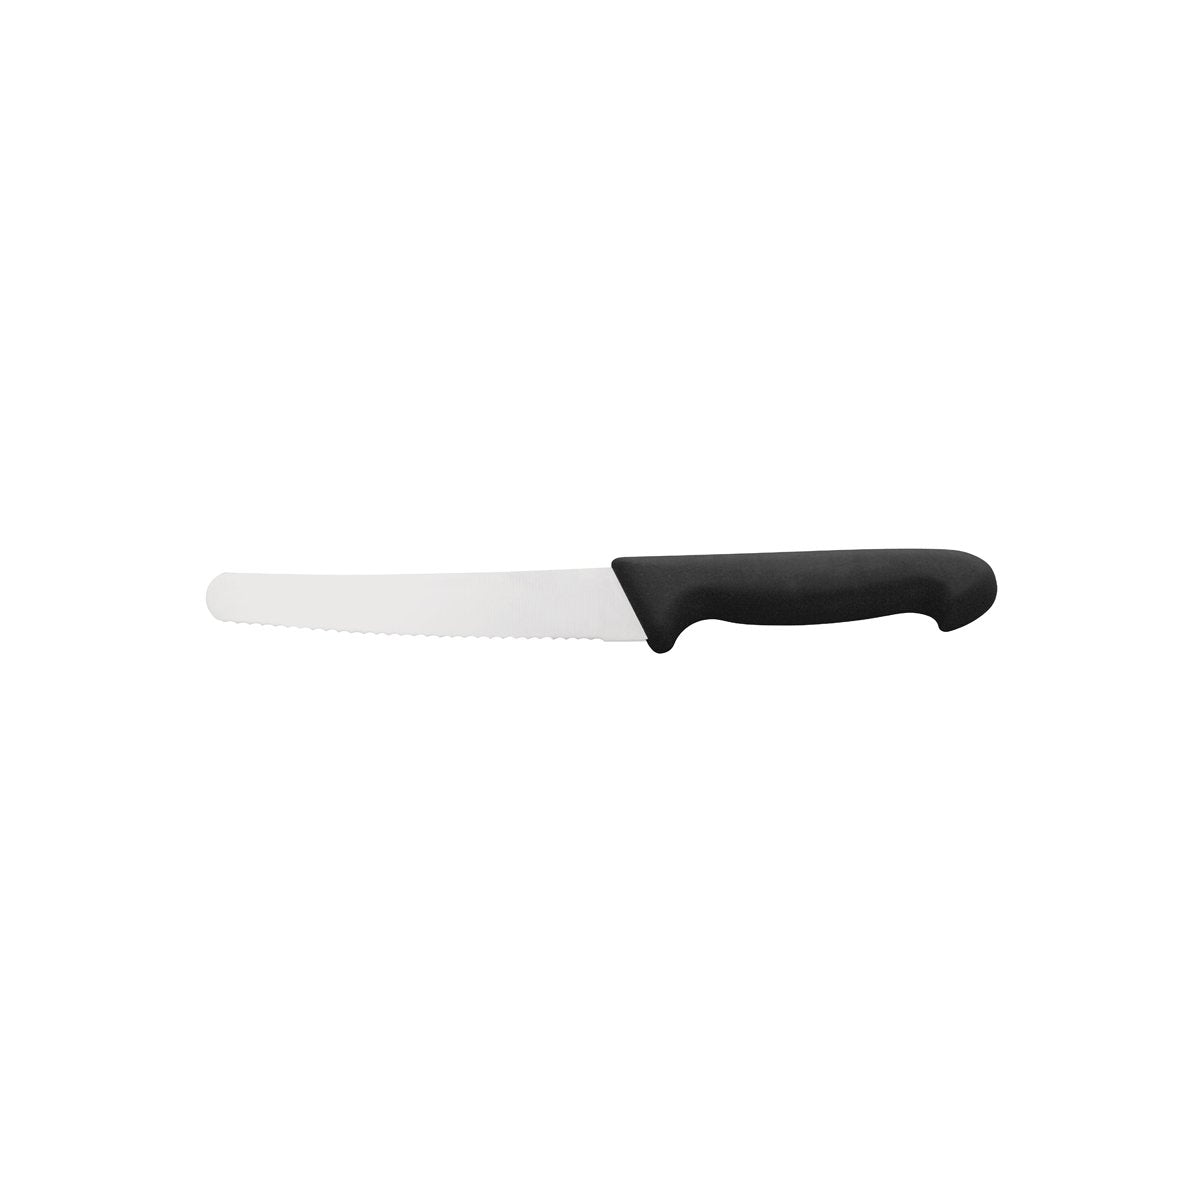 25021 Ivo Professional 55000 Bread Knife Rounded Tip 200mm Tomkin Australia Hospitality Supplies